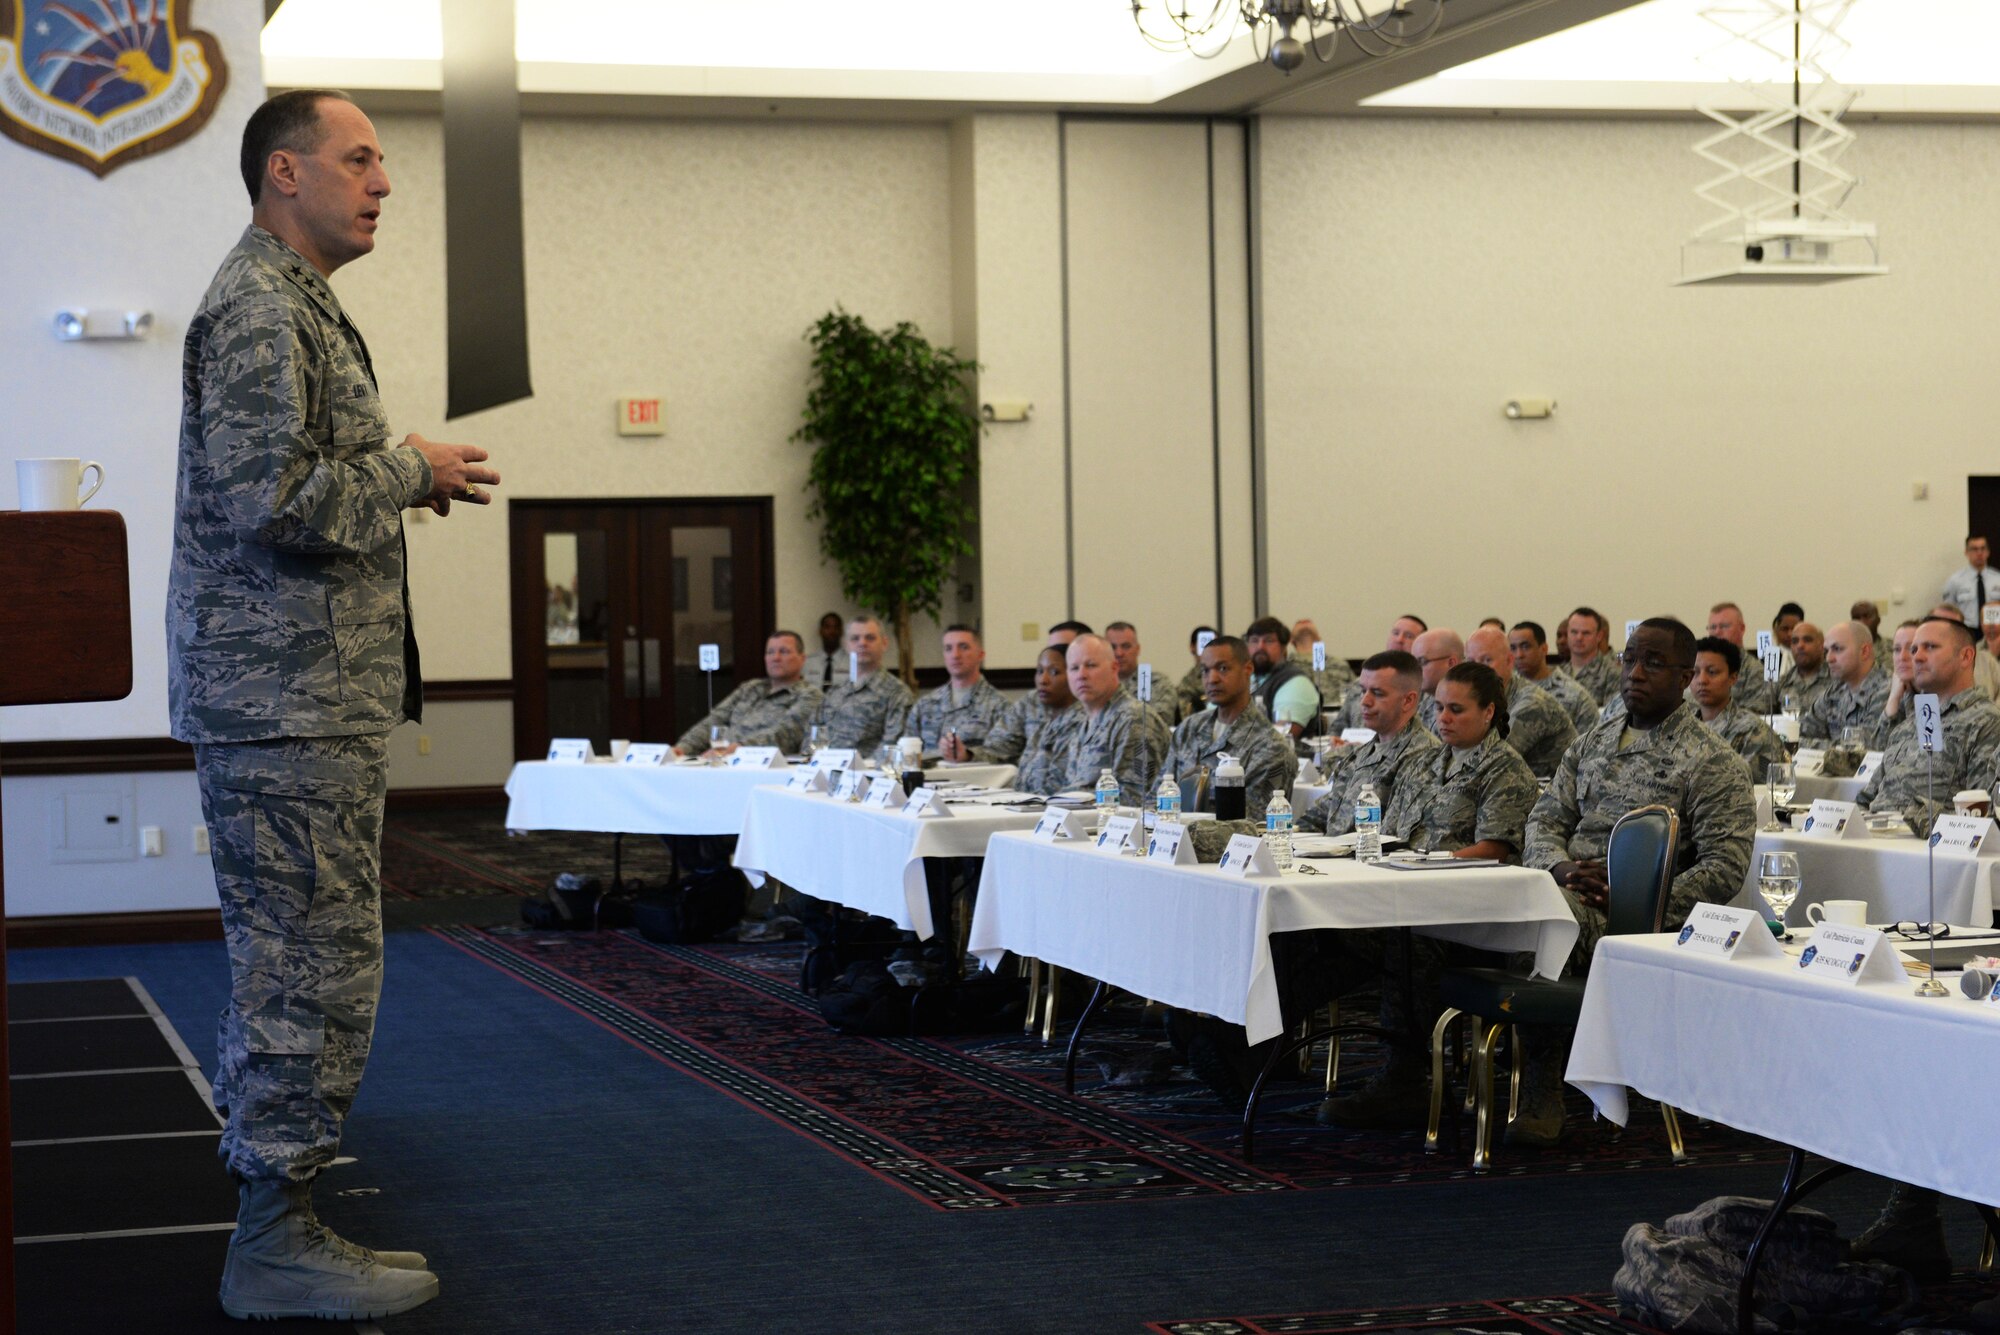 Lt. Gen. Lee Levy II, Air Force Sustainment Center, Air Force Materiel Command commander, speaks to an audience of logistics leaders about modern warfare and the importance of being ready in an ever-changing war domain at a 2-day logistics summit at Scott Air Force Base March 21. He told attendees to make sure they are connected with mission-generating activities and get scare resources to where they will be most beneficial to getting the job done. (U.S. Air Force photo by Tech. Sgt. Maria Castle)